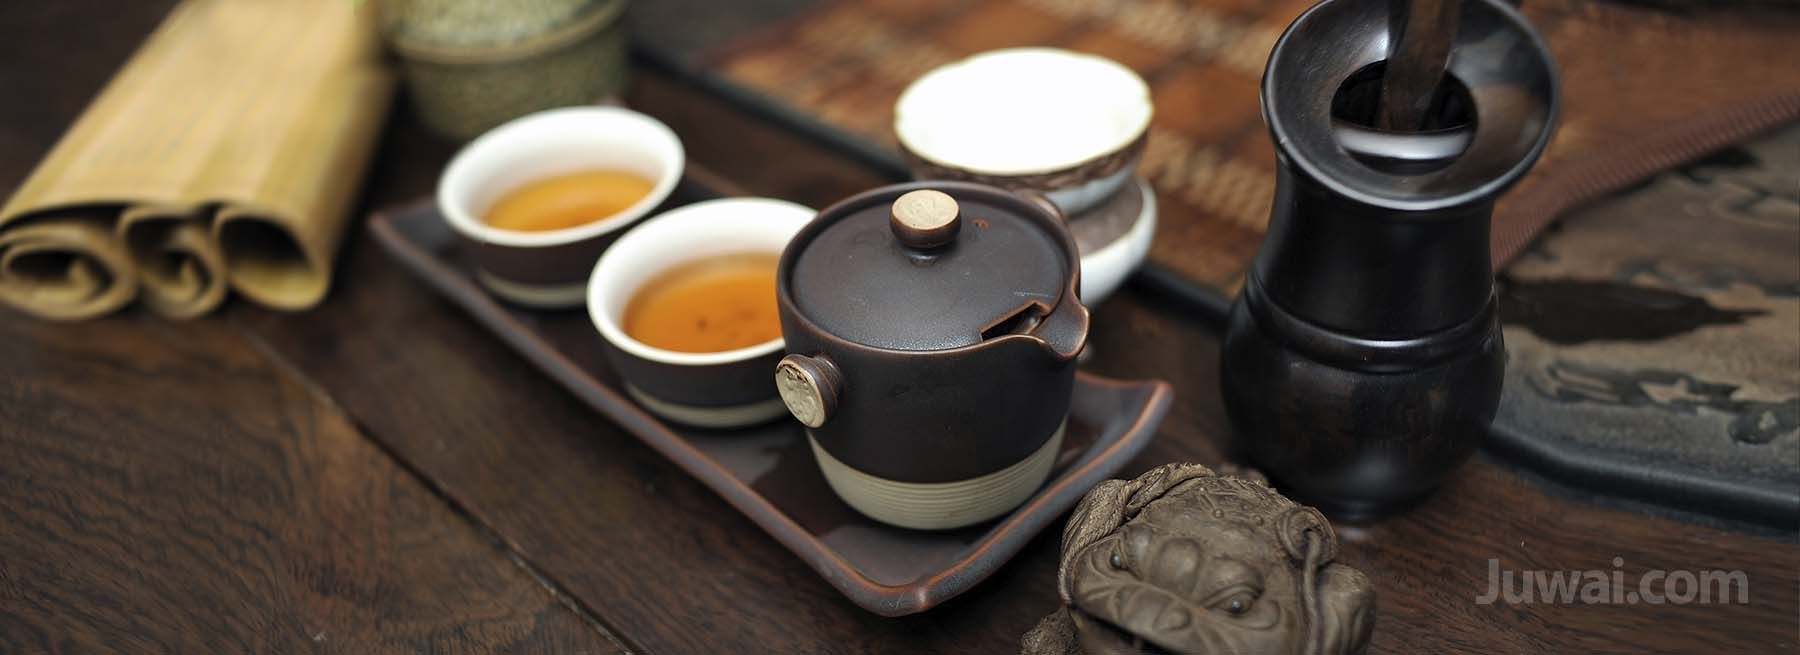 The Chinese art of tea